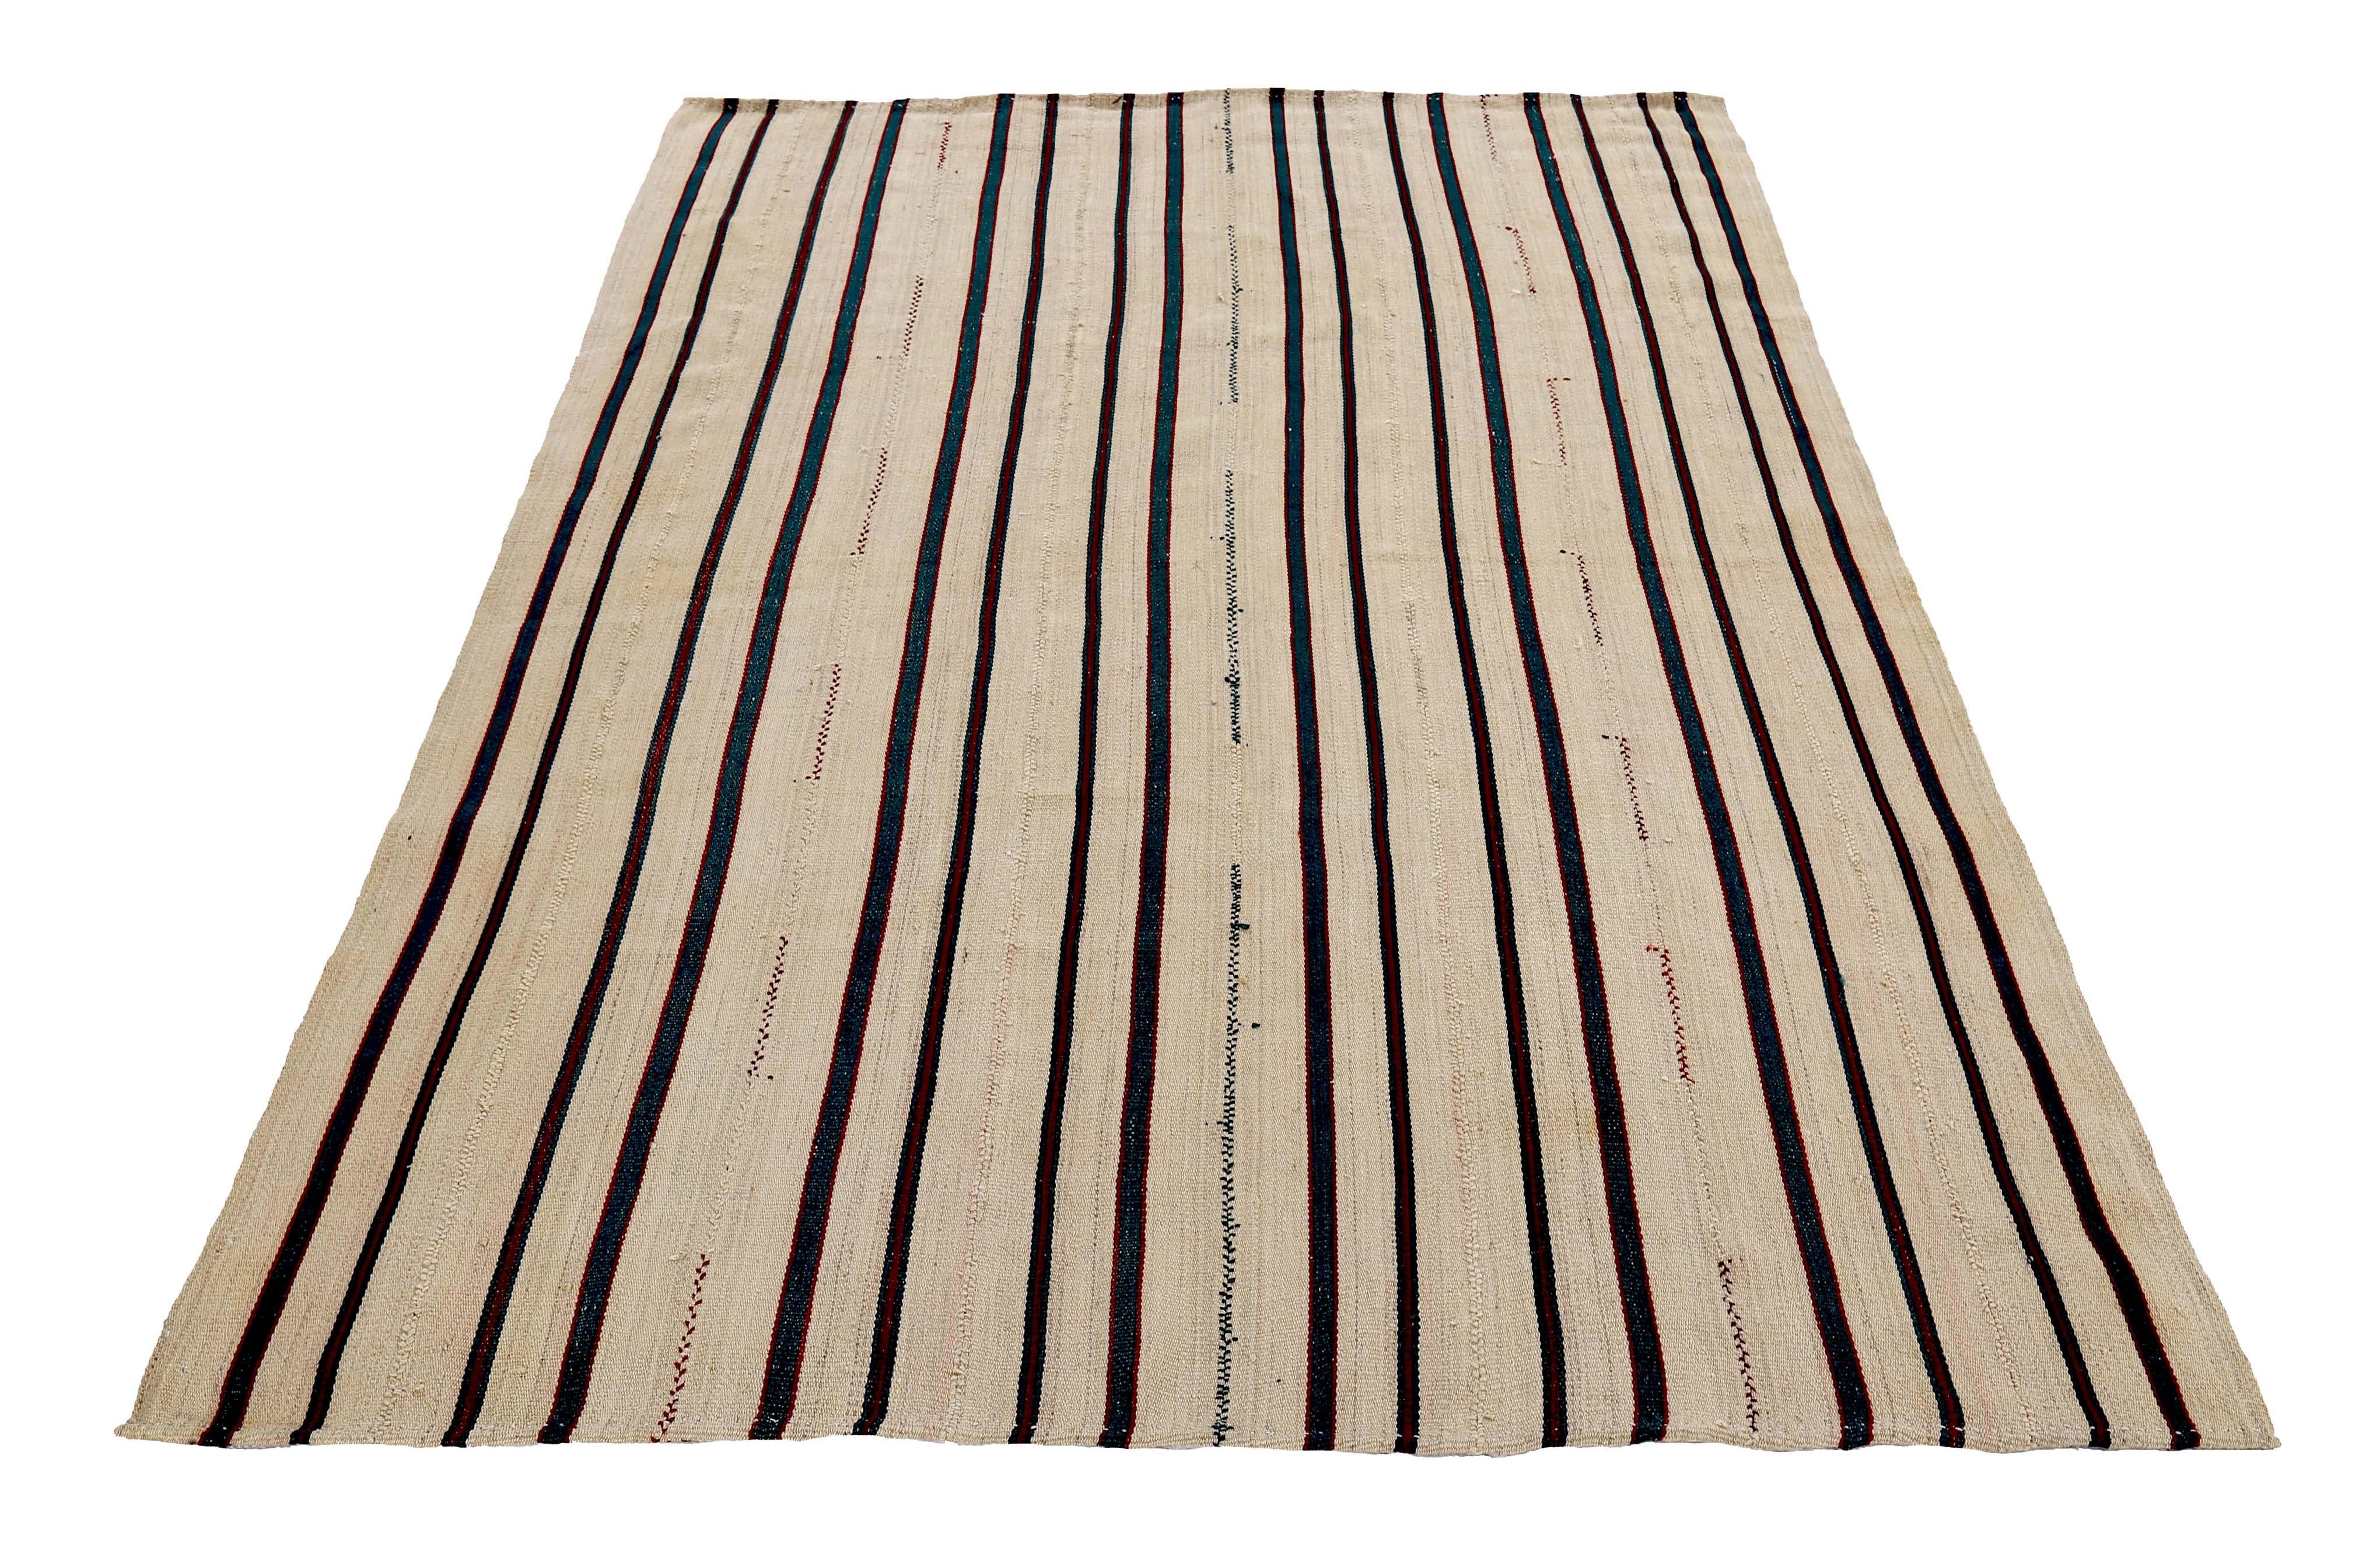 Turkish runner rug handwoven from the finest sheep’s wool and colored with all-natural vegetable dyes that are safe for humans and pets. It’s a traditional Kilim flat-weave design featuring a red and green stripes over an ivory field. It’s a